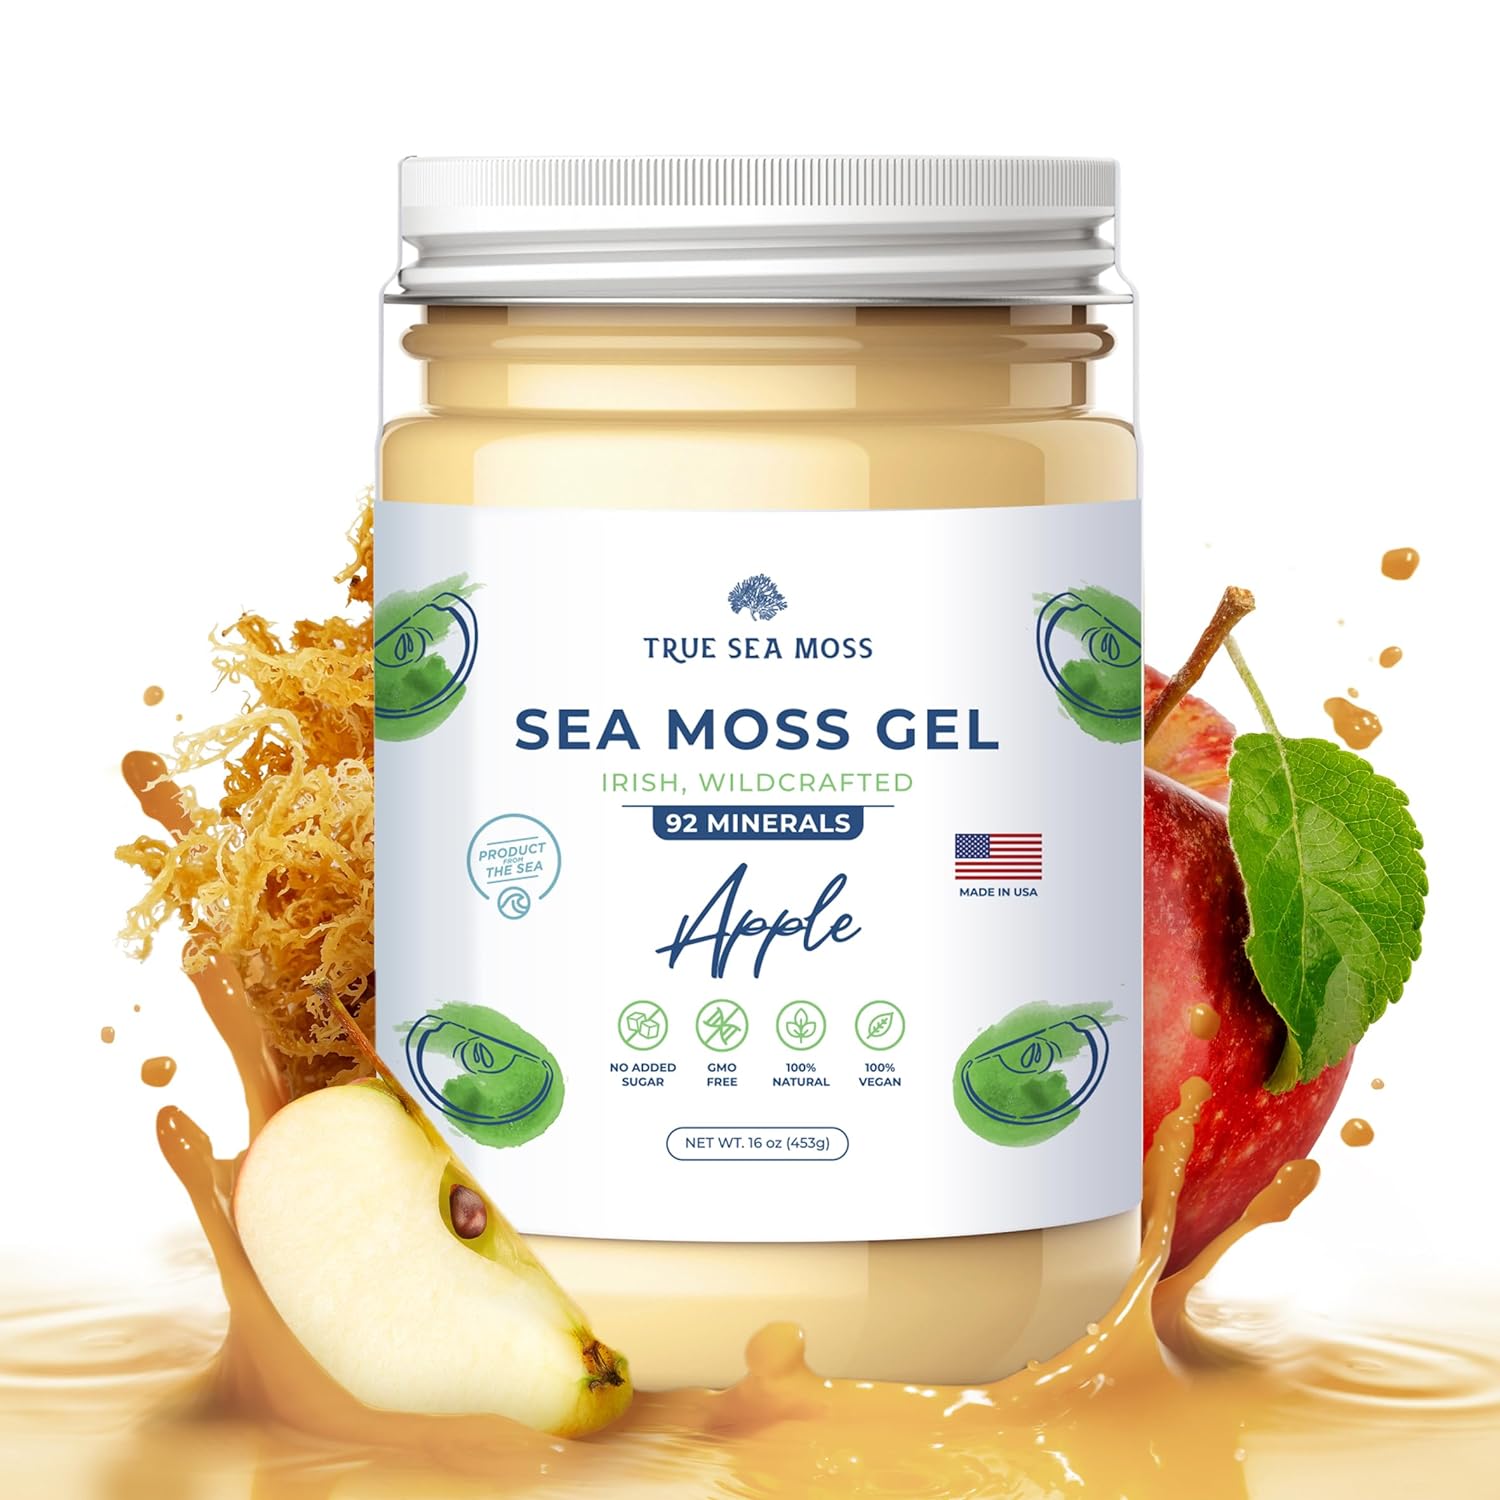 TrueSeaMoss Wildcrafted Irish Sea Moss Gel - Made with Dried Seaweed - Seamoss, Vegan-Friendly, Antioxidant Supports Thyroid & Digestion - Made in USA (Apple, Pack of 1)